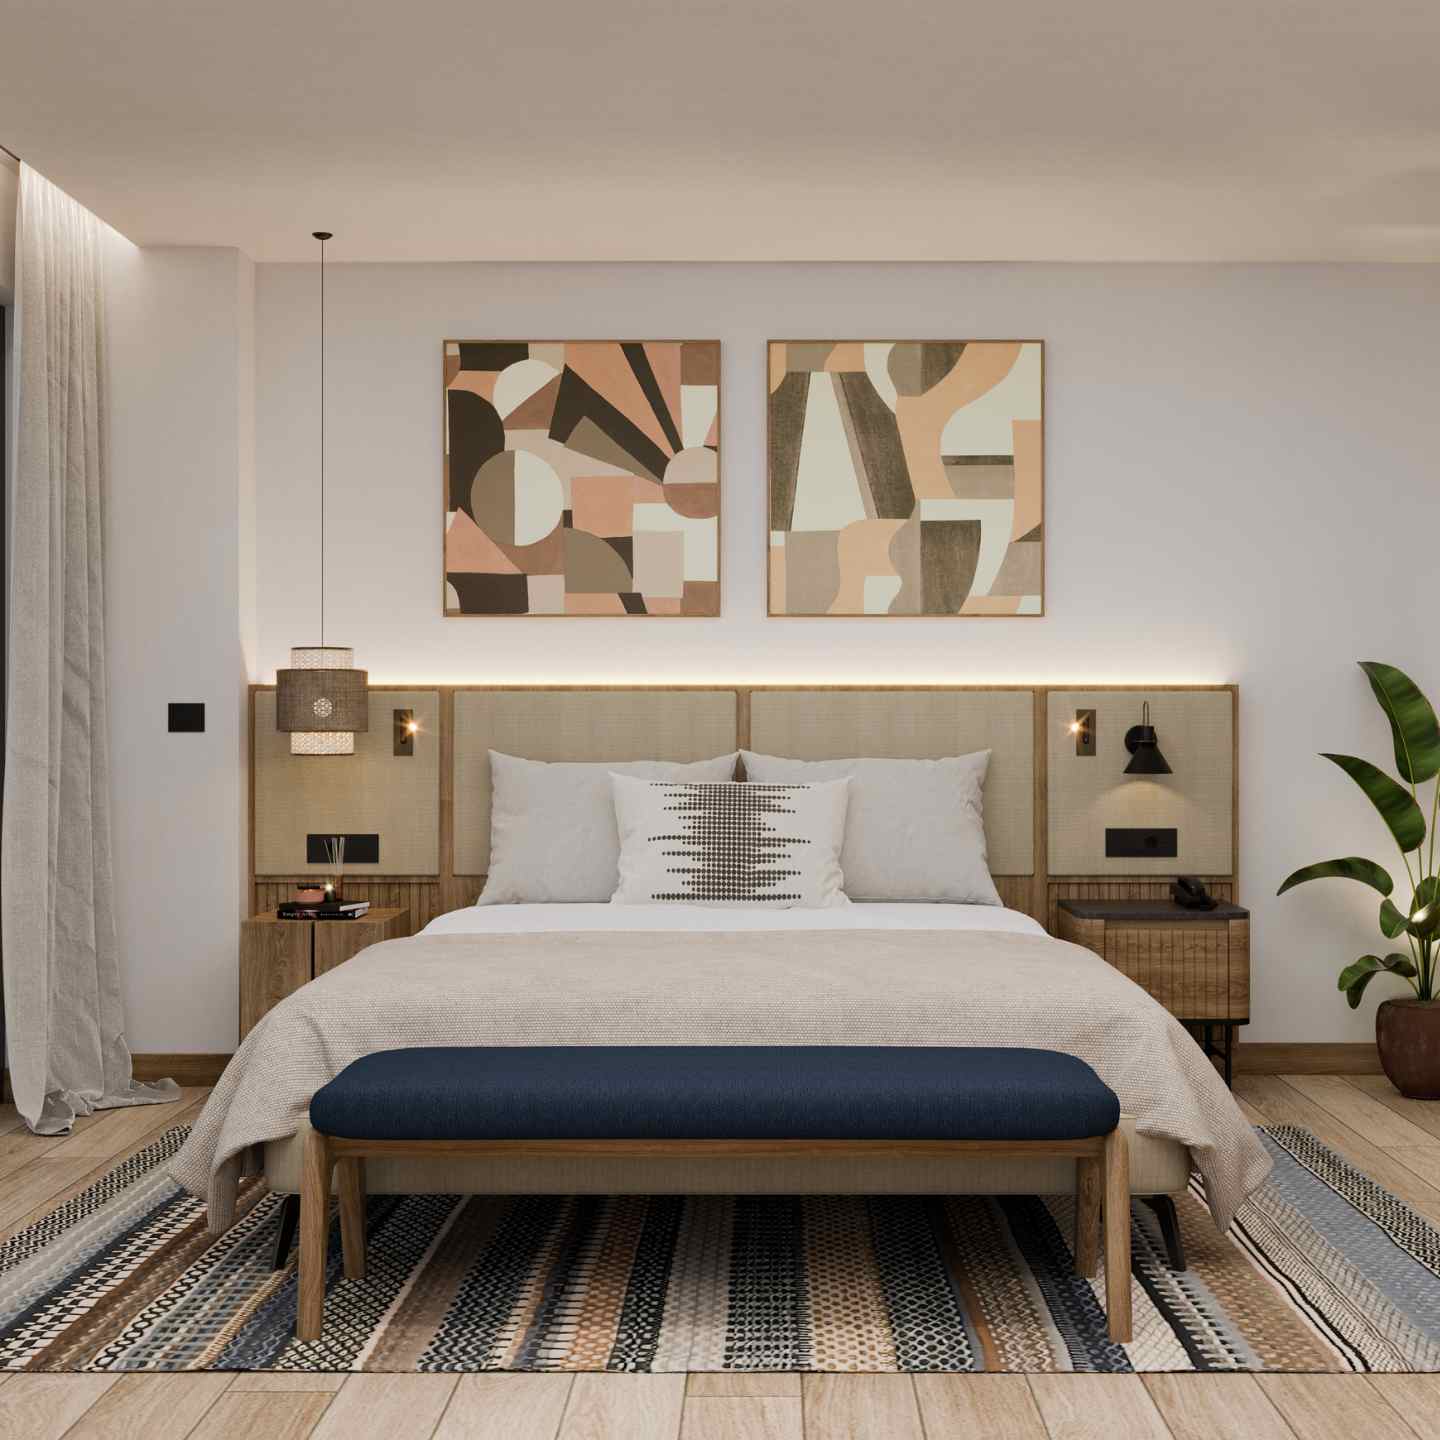 Large beige bed with beige and light wooden headboard with blue bench in front of it and two abstract artworks on the wall behind the bed